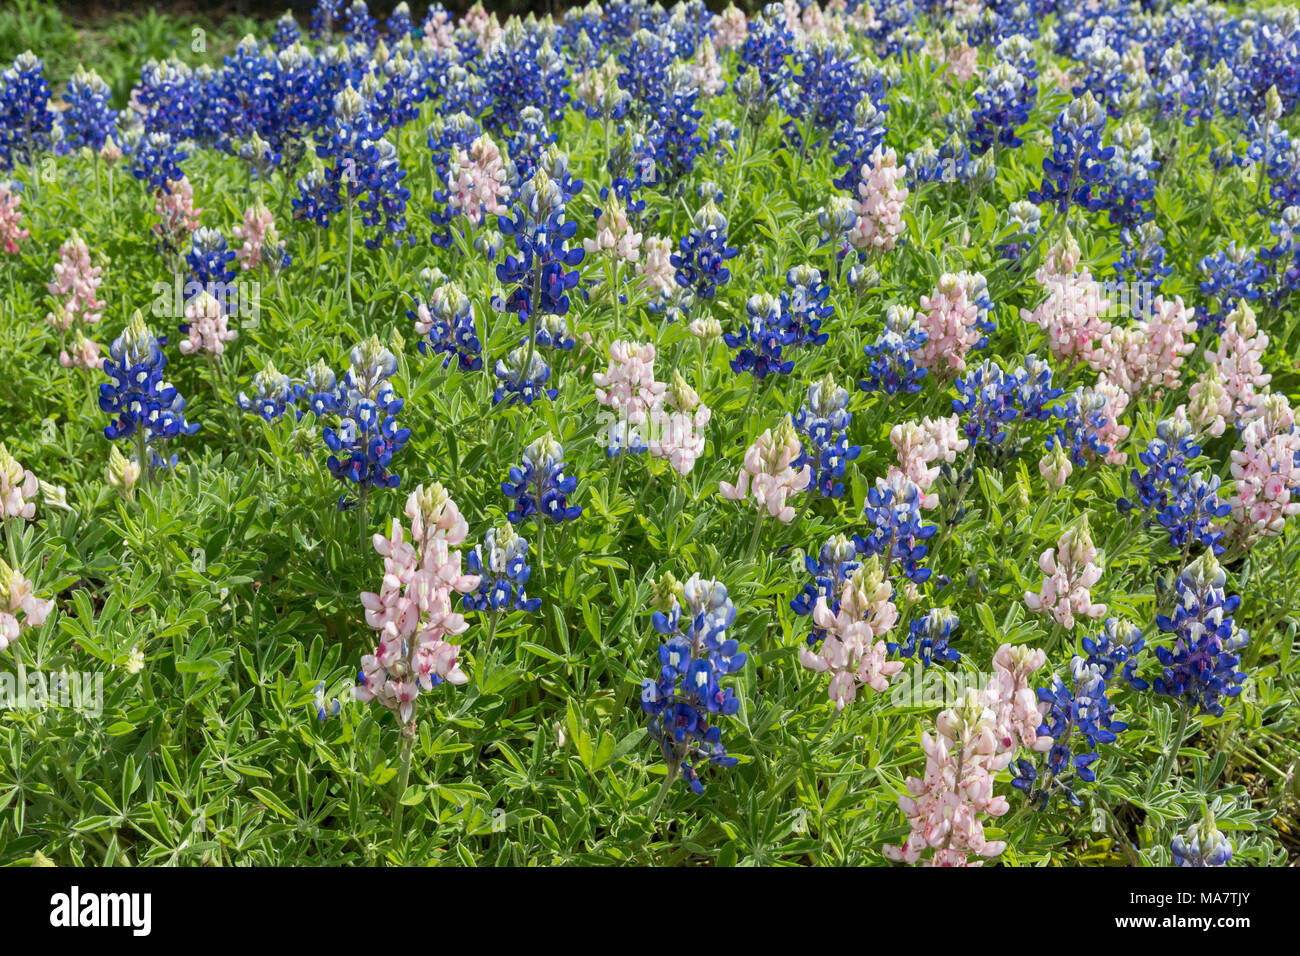 Blue and Pink (rare) Bluebonnets in field Stock Photo